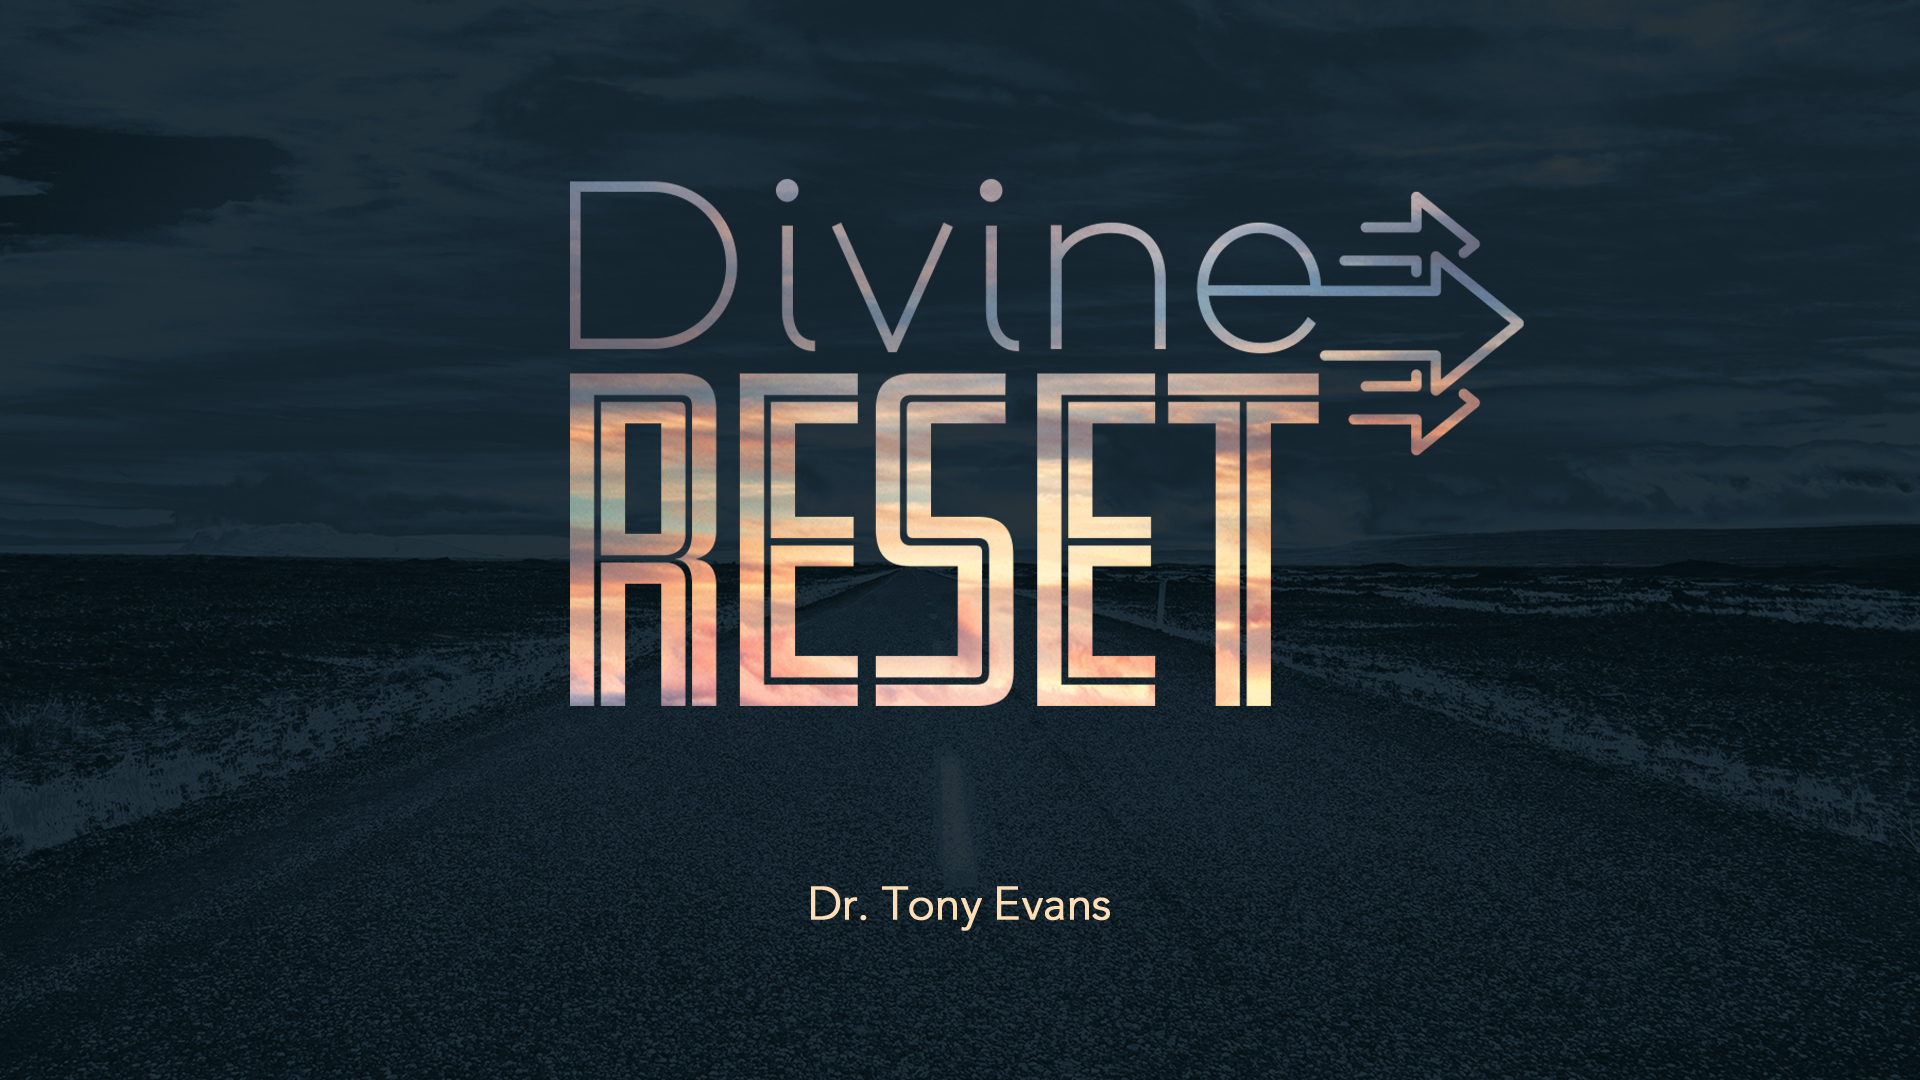 Divine Reset by Dr. Tony Evans with arrows pointing to the right